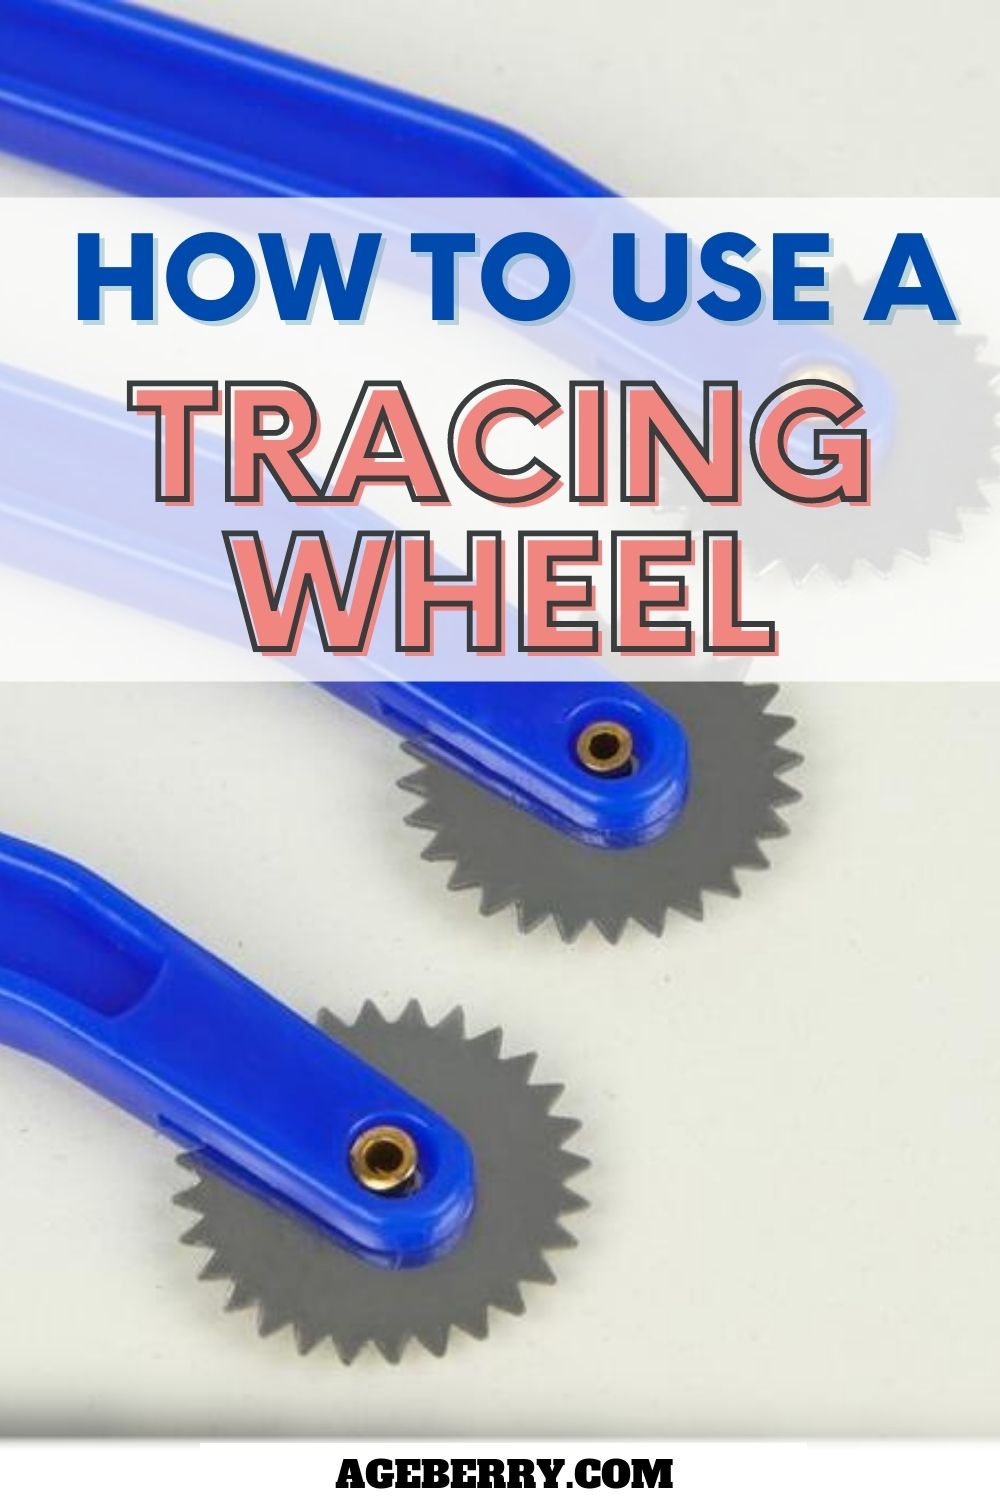 tracing wheel meaning